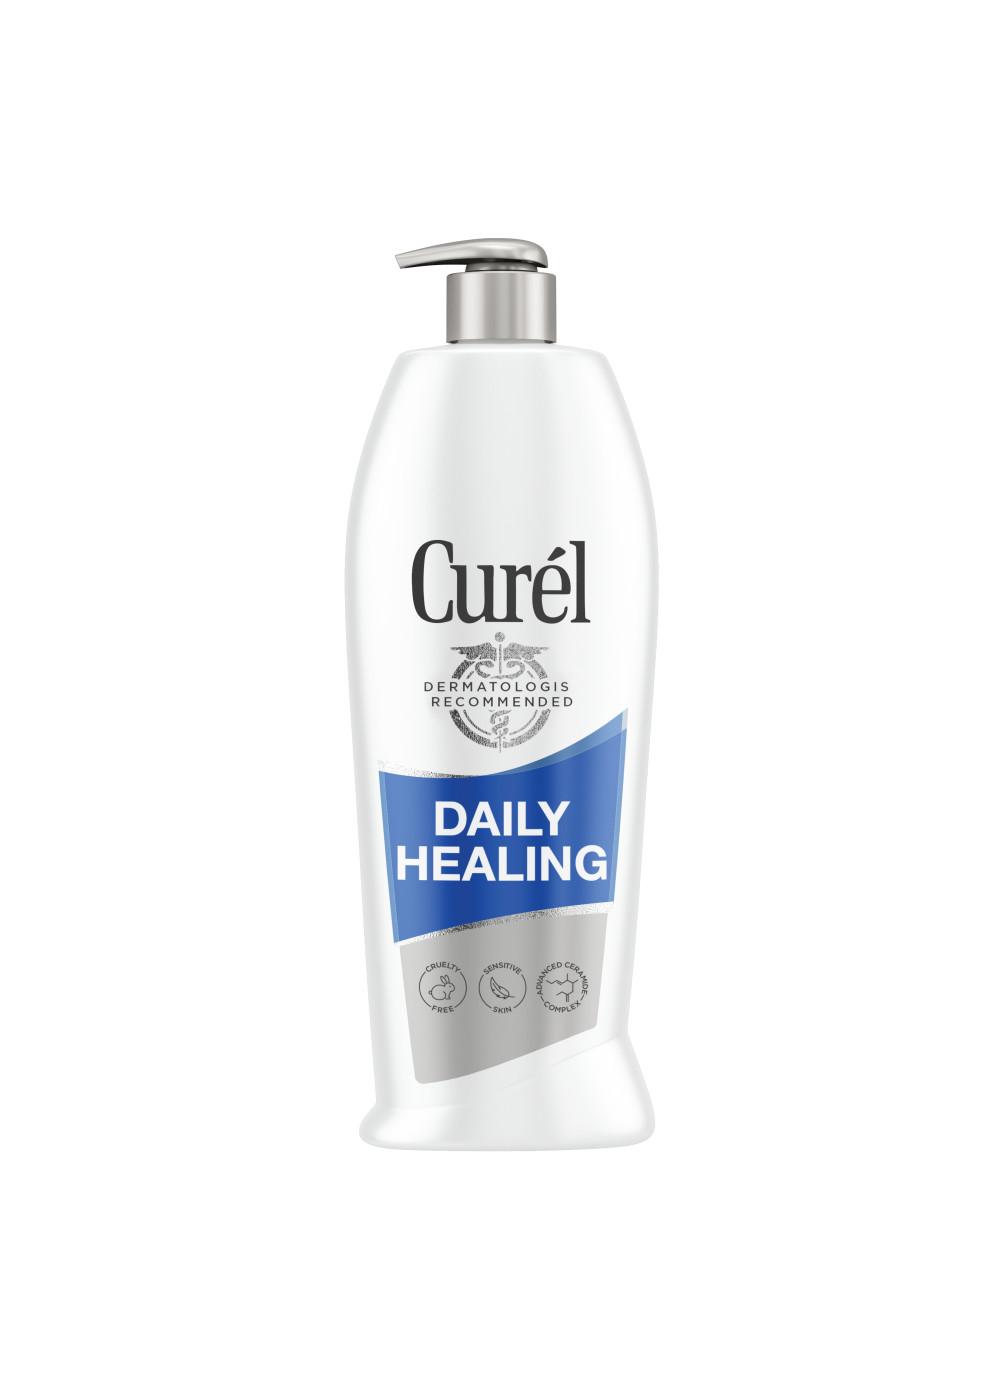 Curel Daily Healing Body Lotion; image 1 of 10